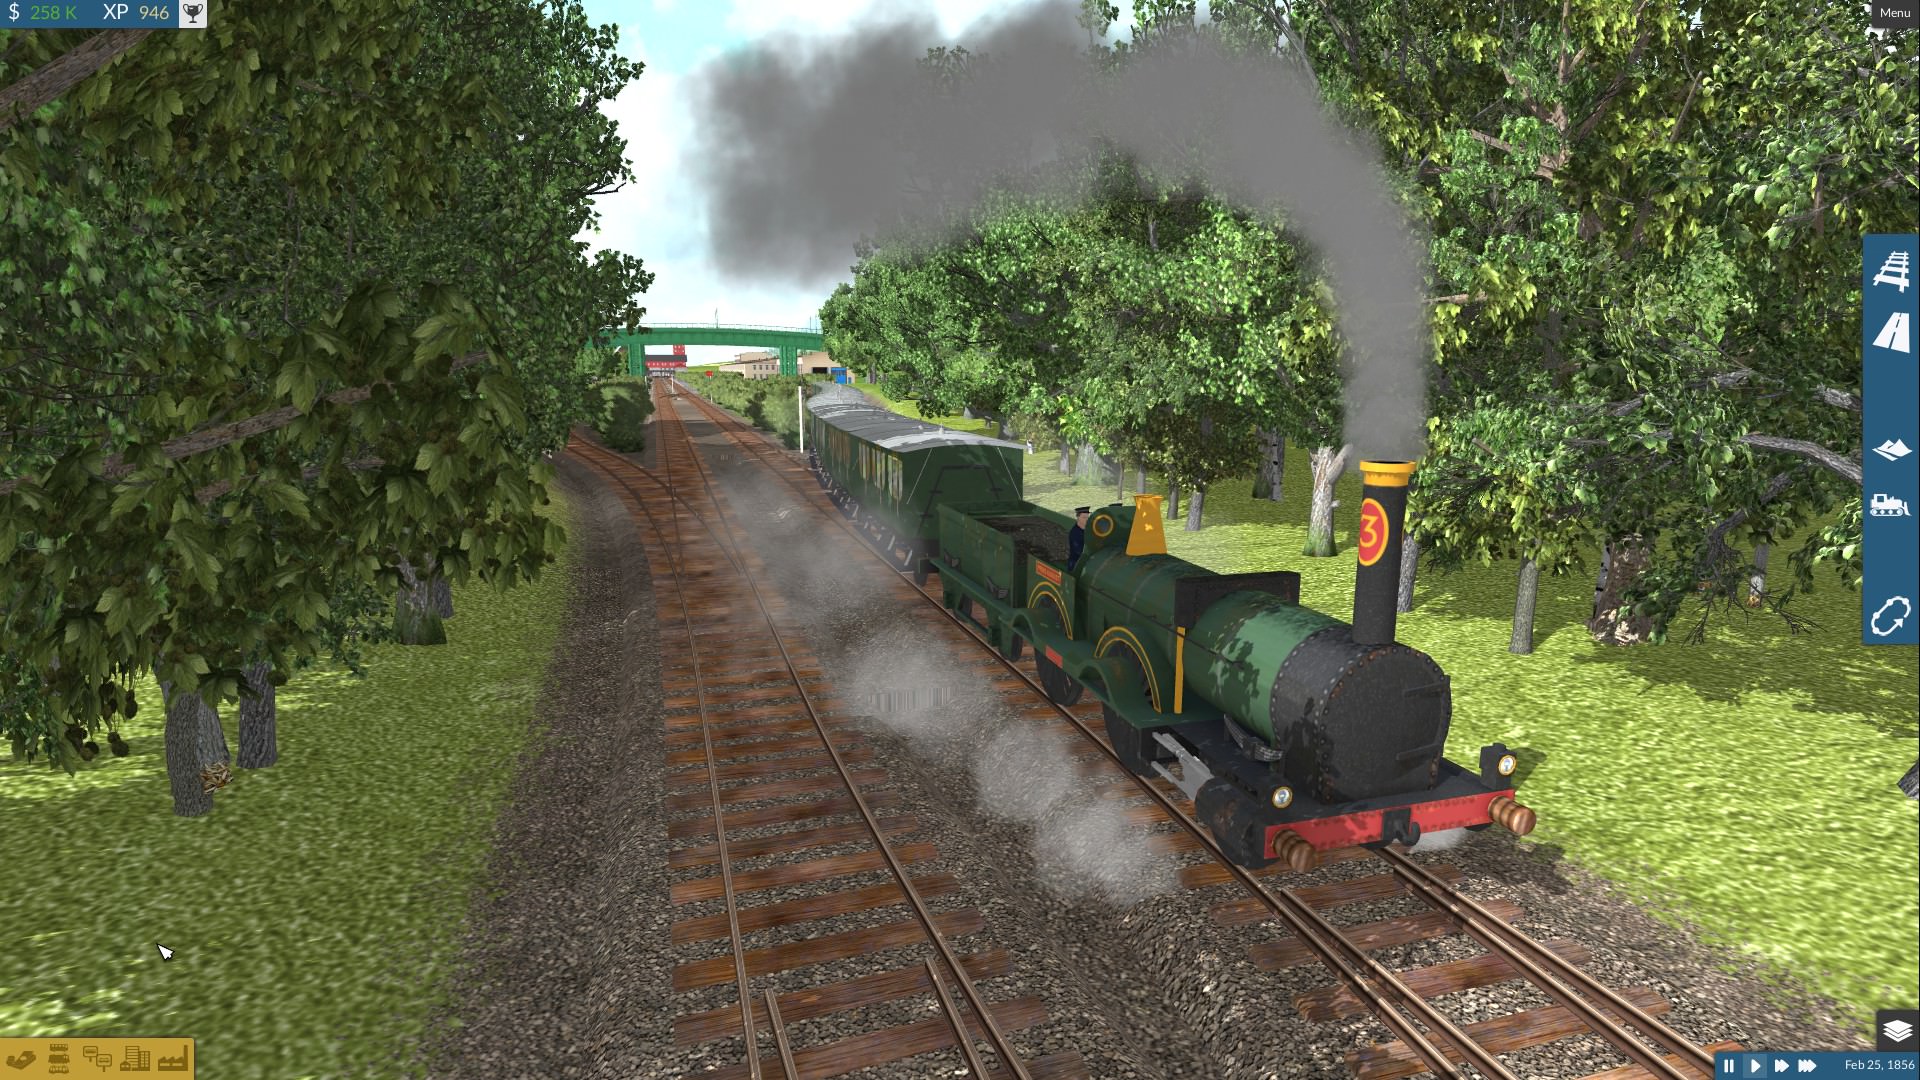 First train out from the depot